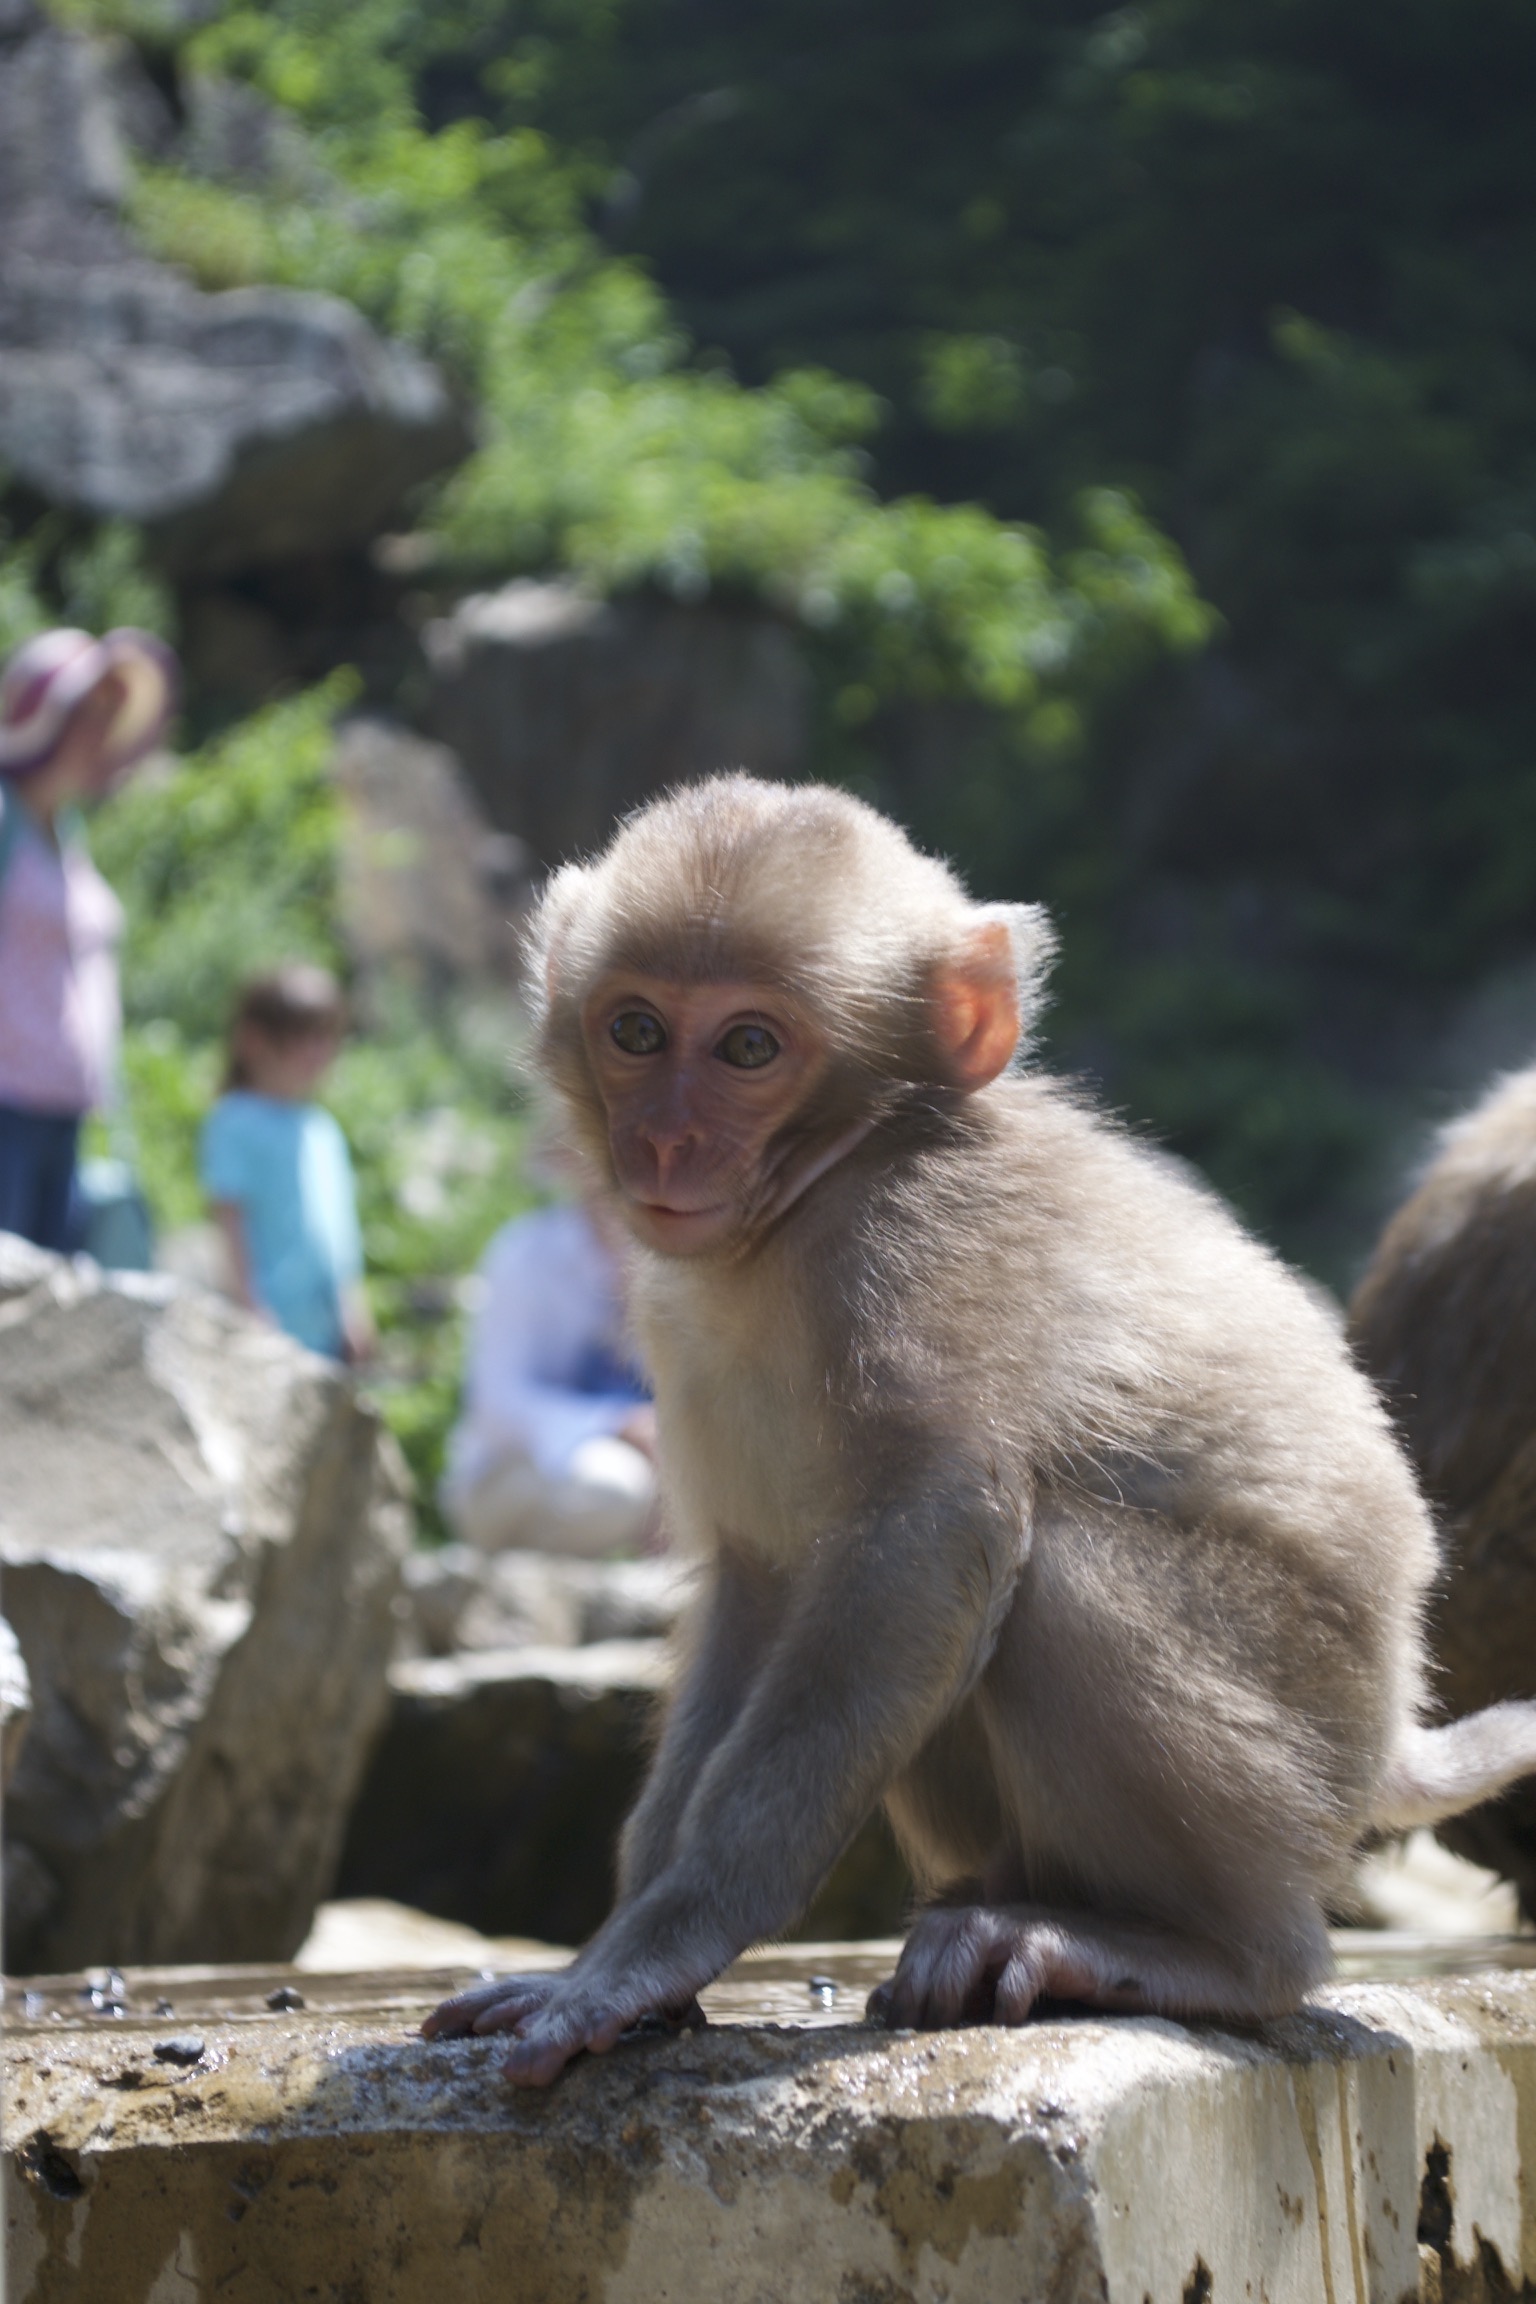 A baby snow monkey looks directly into the camera.